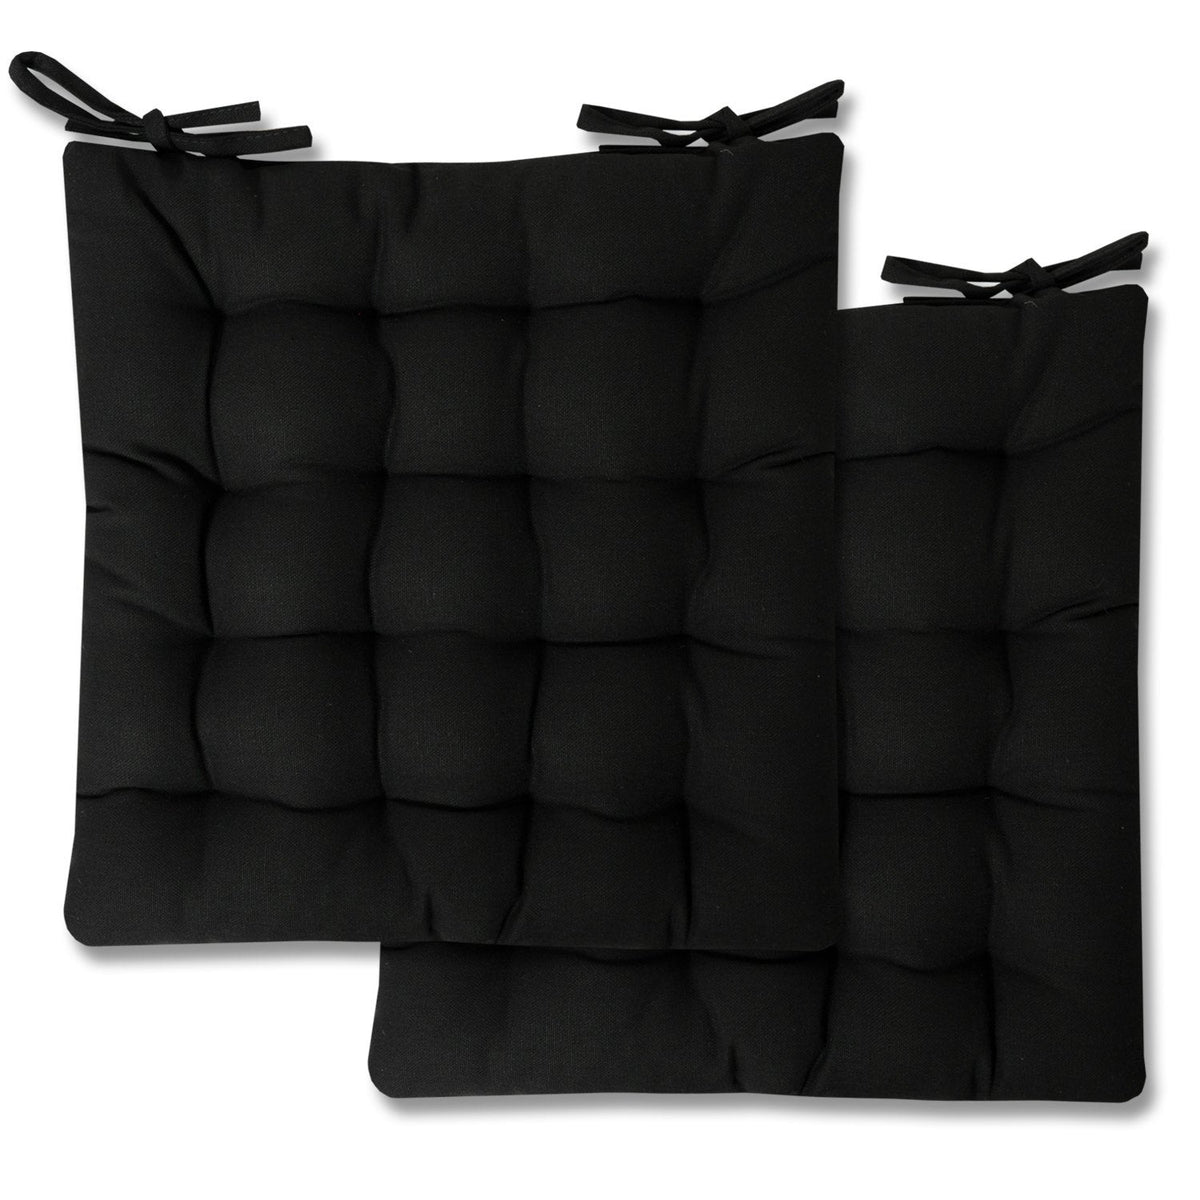 Tufted Chair Cushion Set 16 By 16 Black 2-Pack